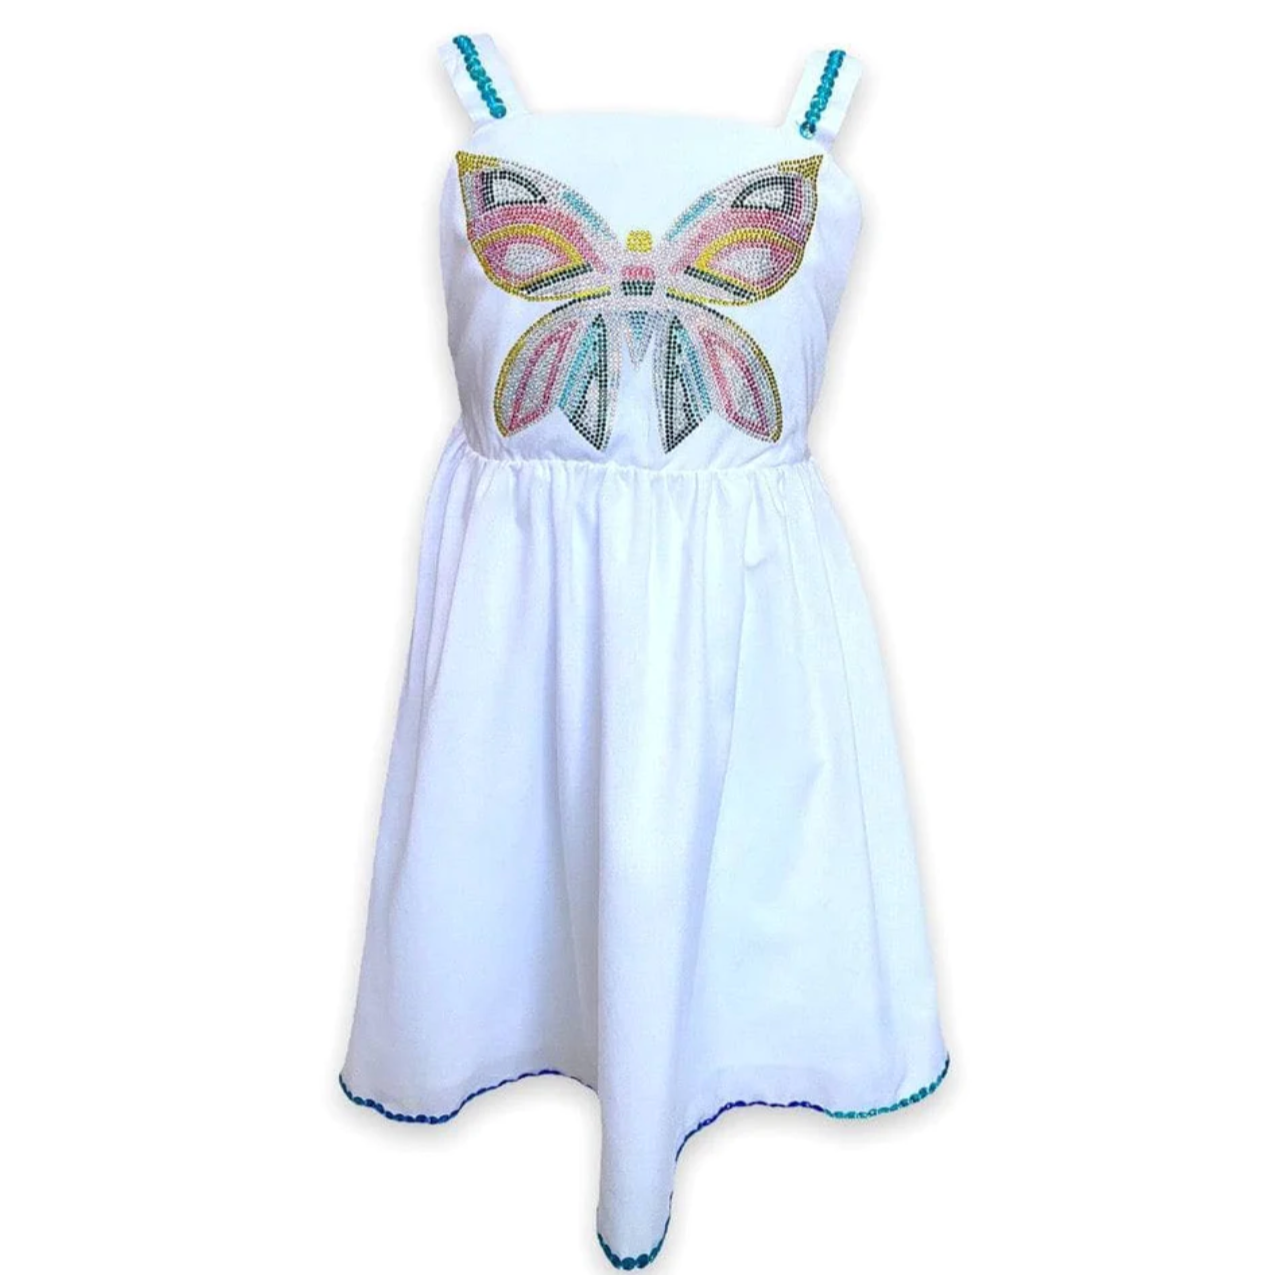 Crystal Butterfly Sundress - Magpies Paducah